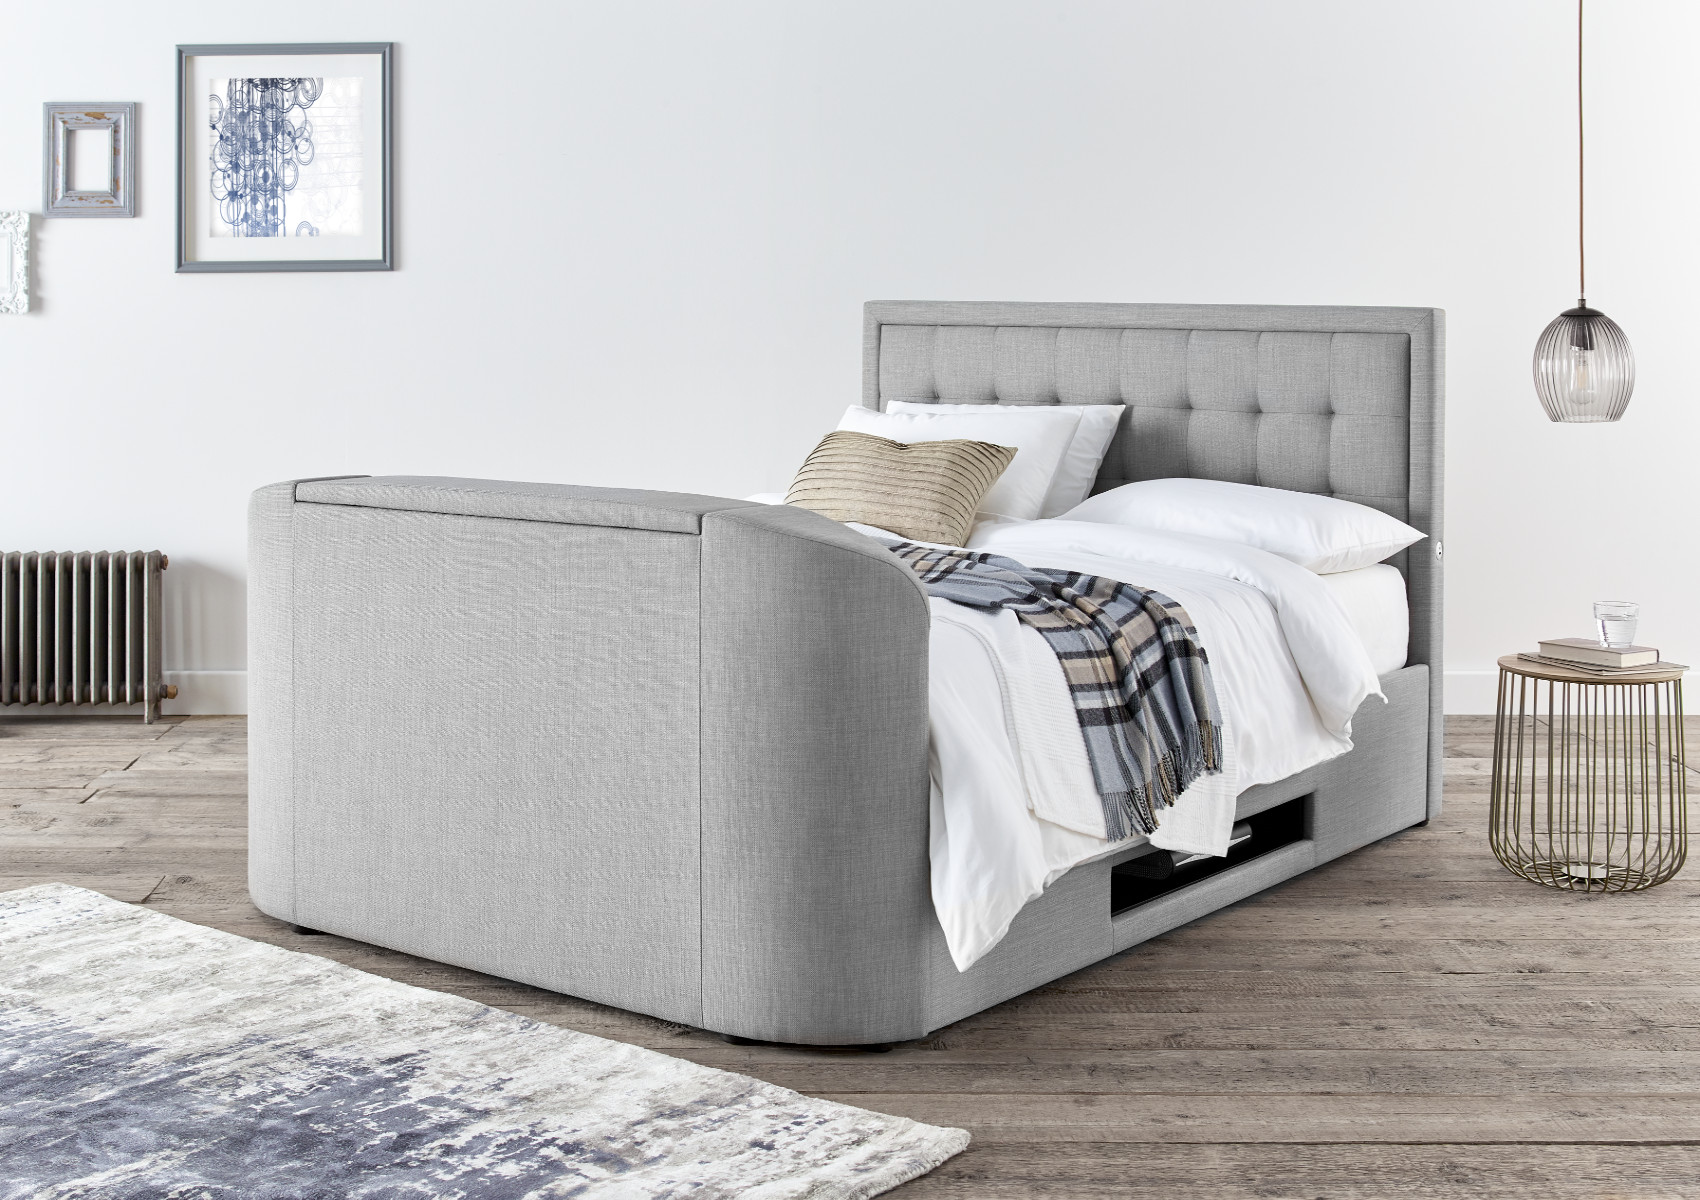 View Carmel Mid Grey Upholstered King Size Multifunctional Ottoman Smart TV Bed Time4Sleep information